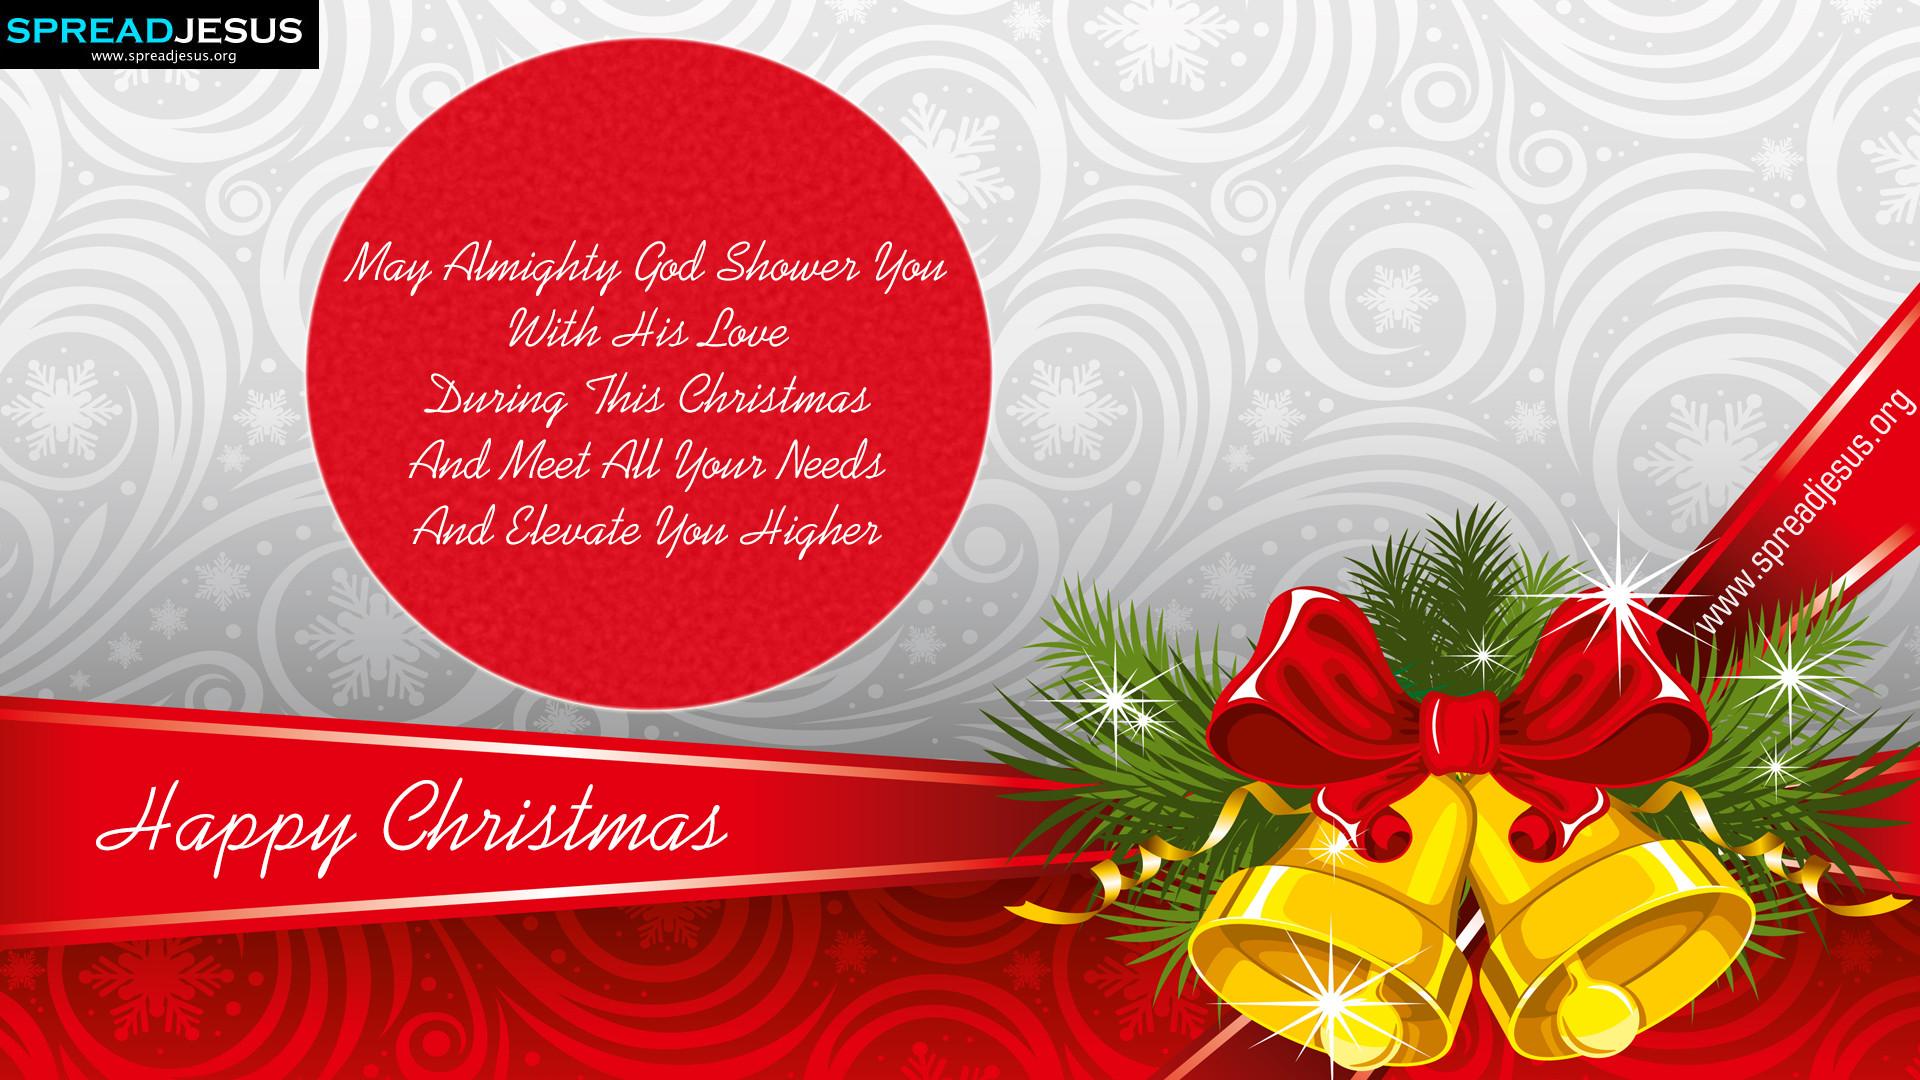 HAPPY CHRISTMAS QUOTES HD WALLPAPERS DOWNLOAD